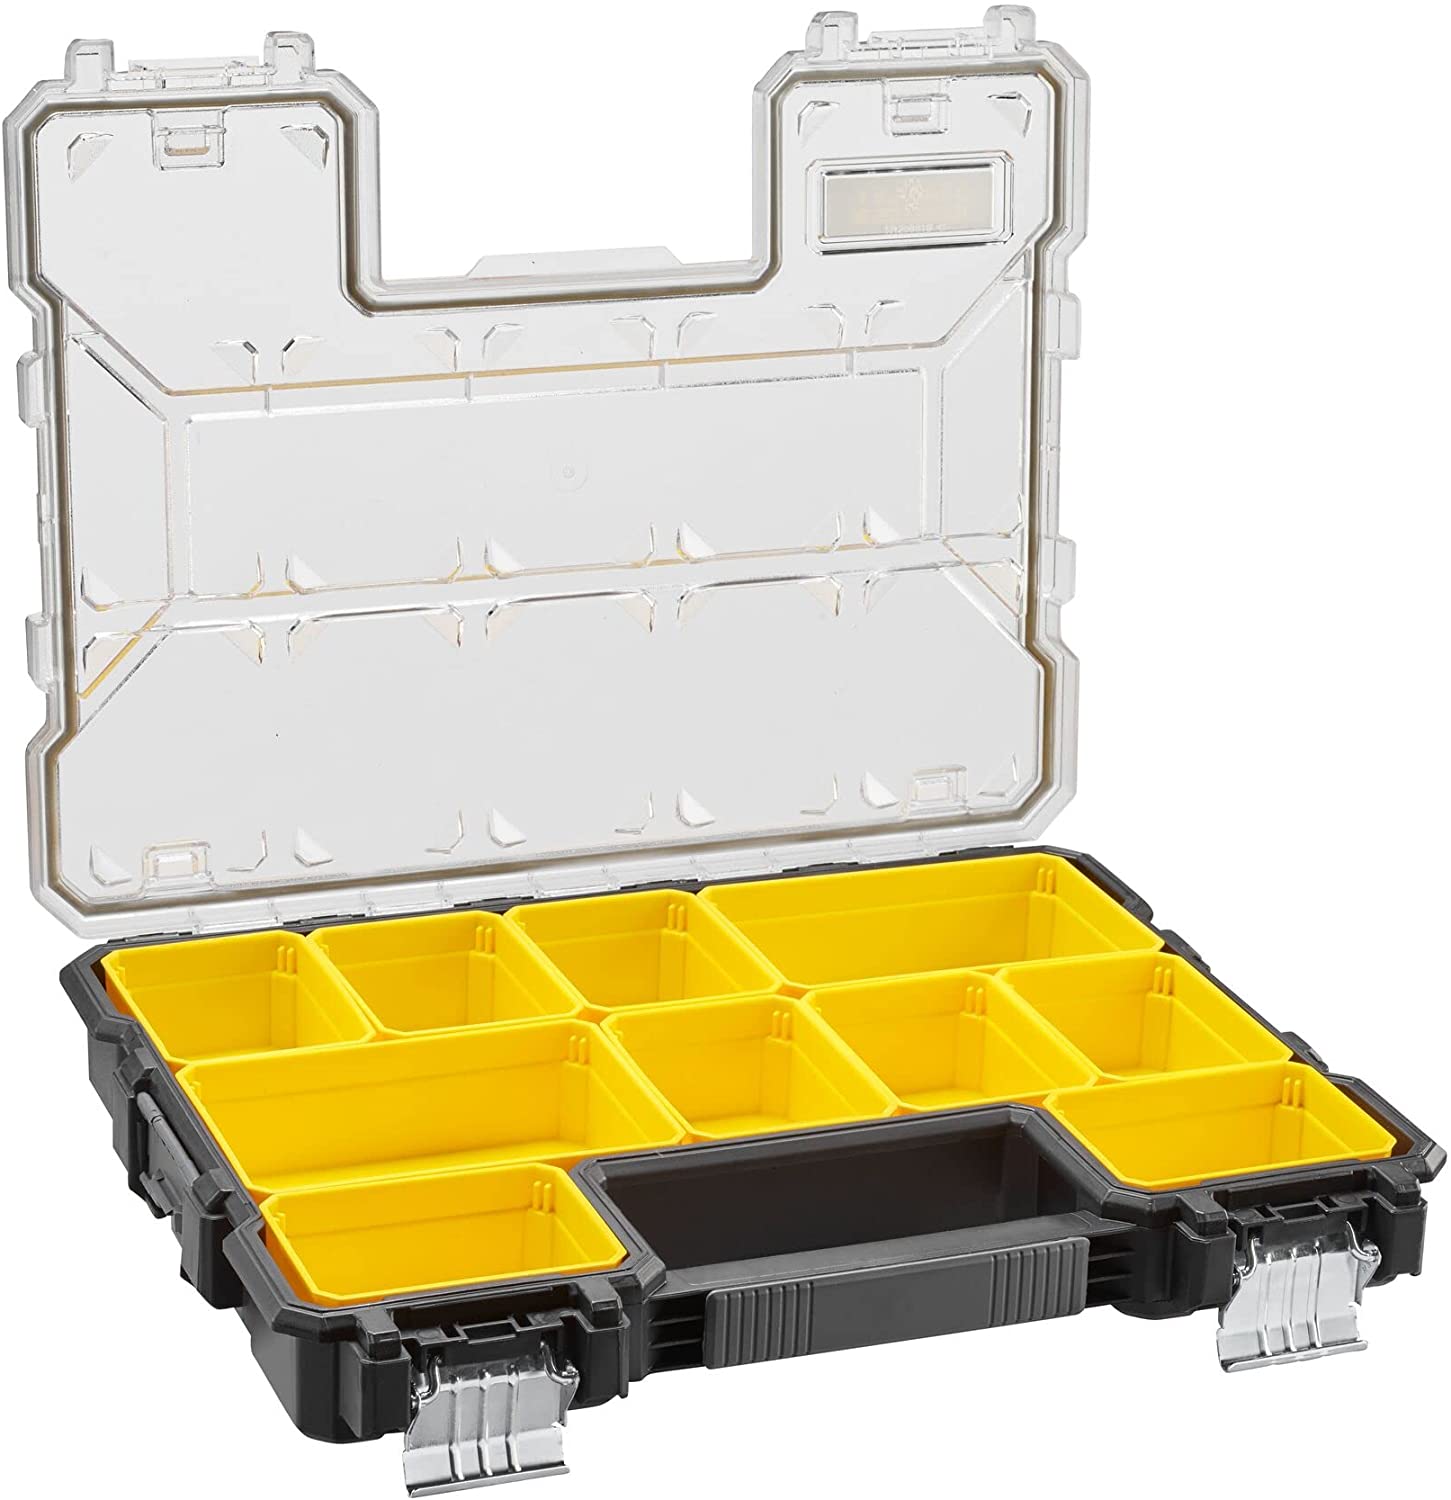 FATMAX Pro Shallow Stackable Storage Organiser for Small Parts, Removable Compartments - 2